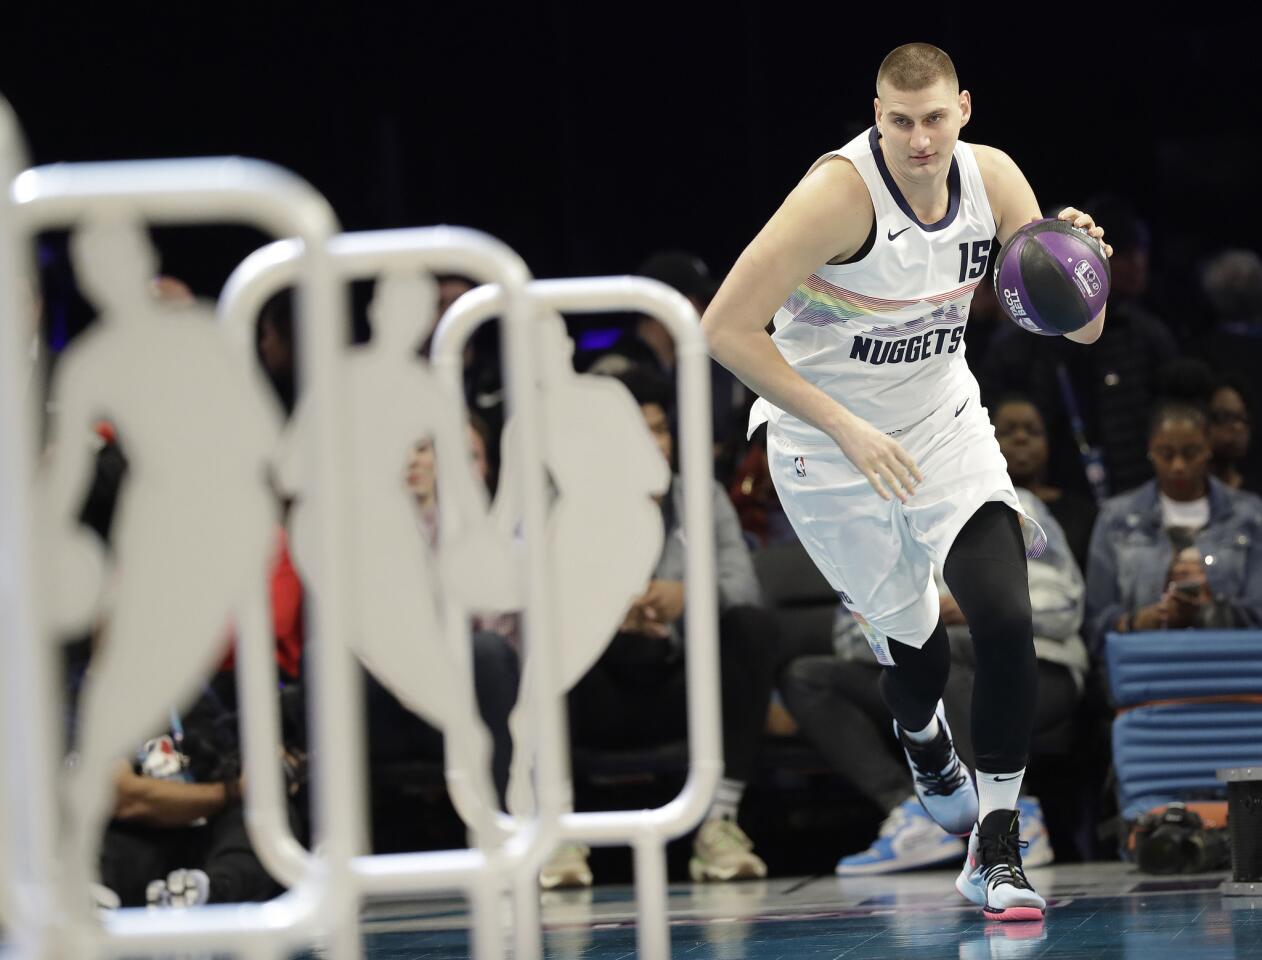 Nuggets center Nikola Jokic approaches the obstacle portion of the skills competition course.